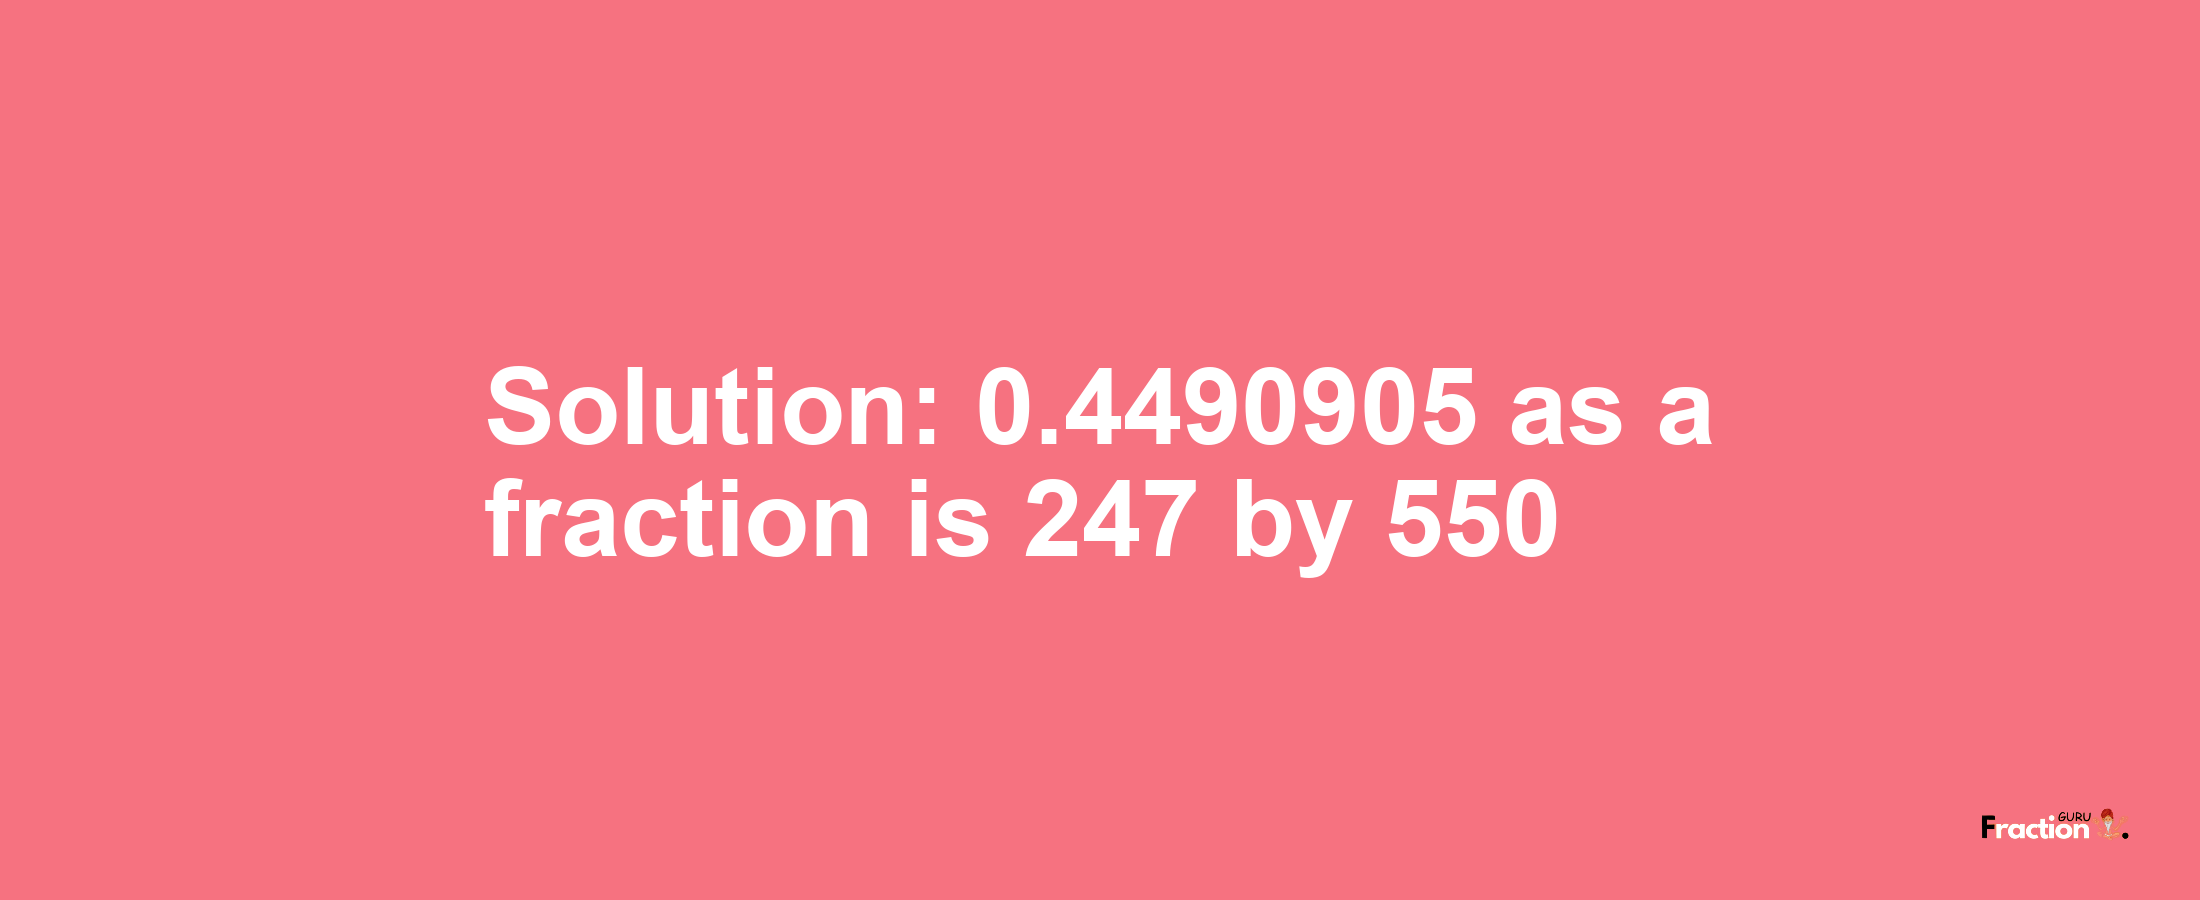 Solution:0.4490905 as a fraction is 247/550